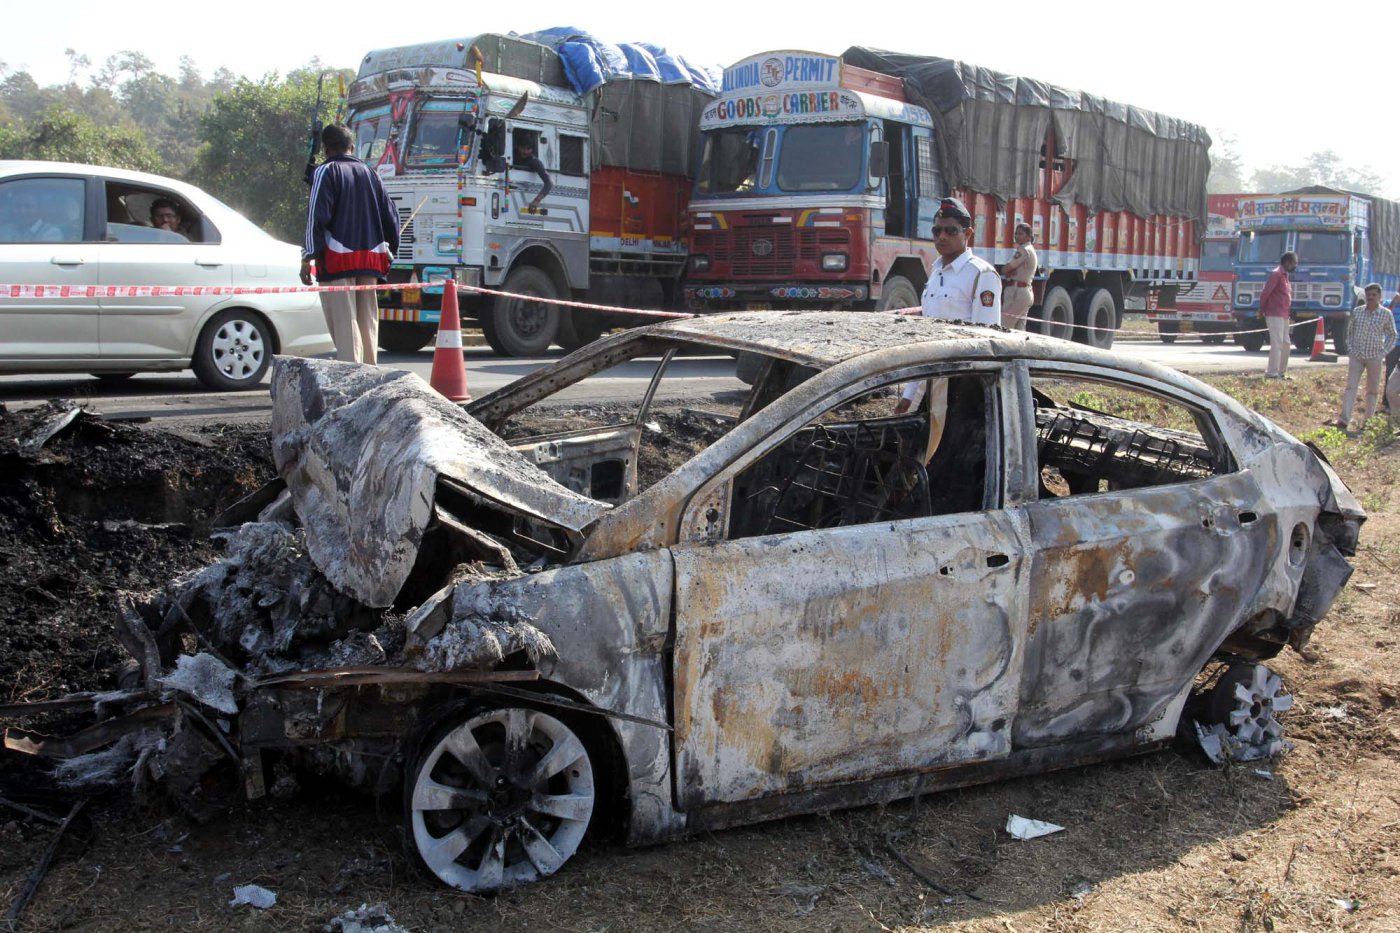 A charred car stands at the accident spot on the Mumbai-Ahmedabad highway near Manor police station following the collision between a tanker containing diesel and a luxury bus on Jan. 29, 2014, in Mumbai, India.